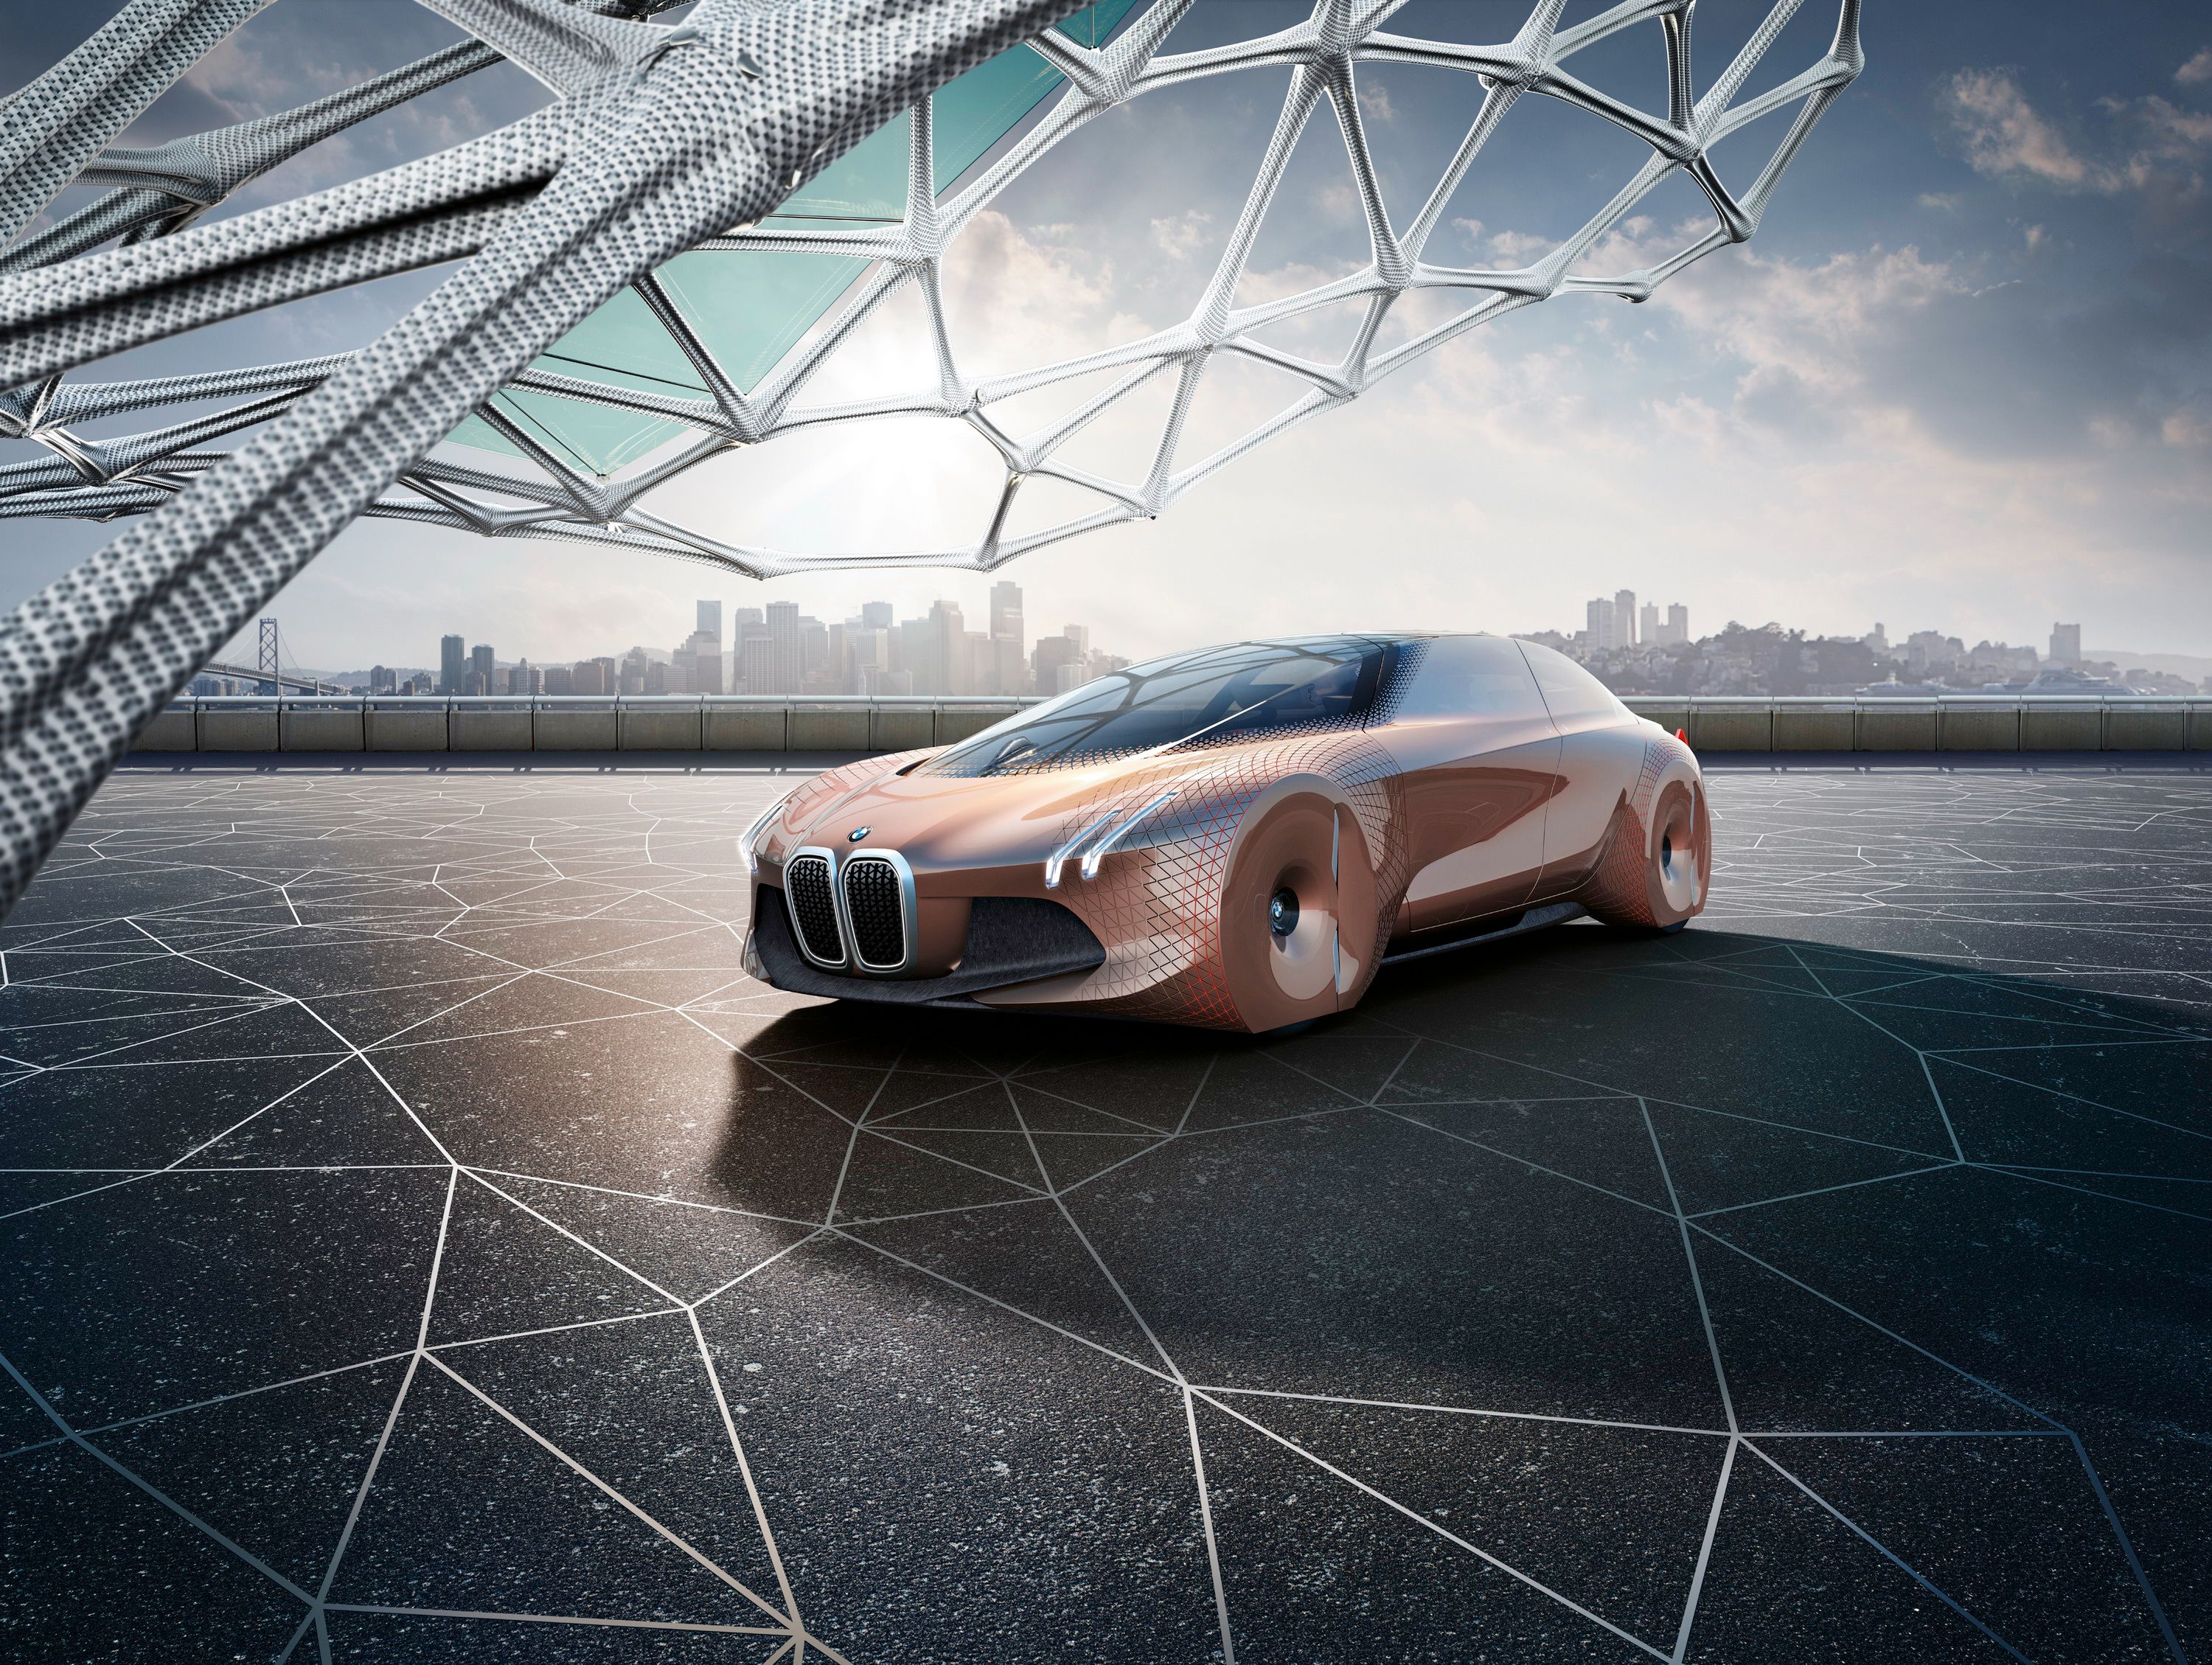 Supercar Blondie Shows Us Just How Crazy the BMW Vision Next 100 Really Is